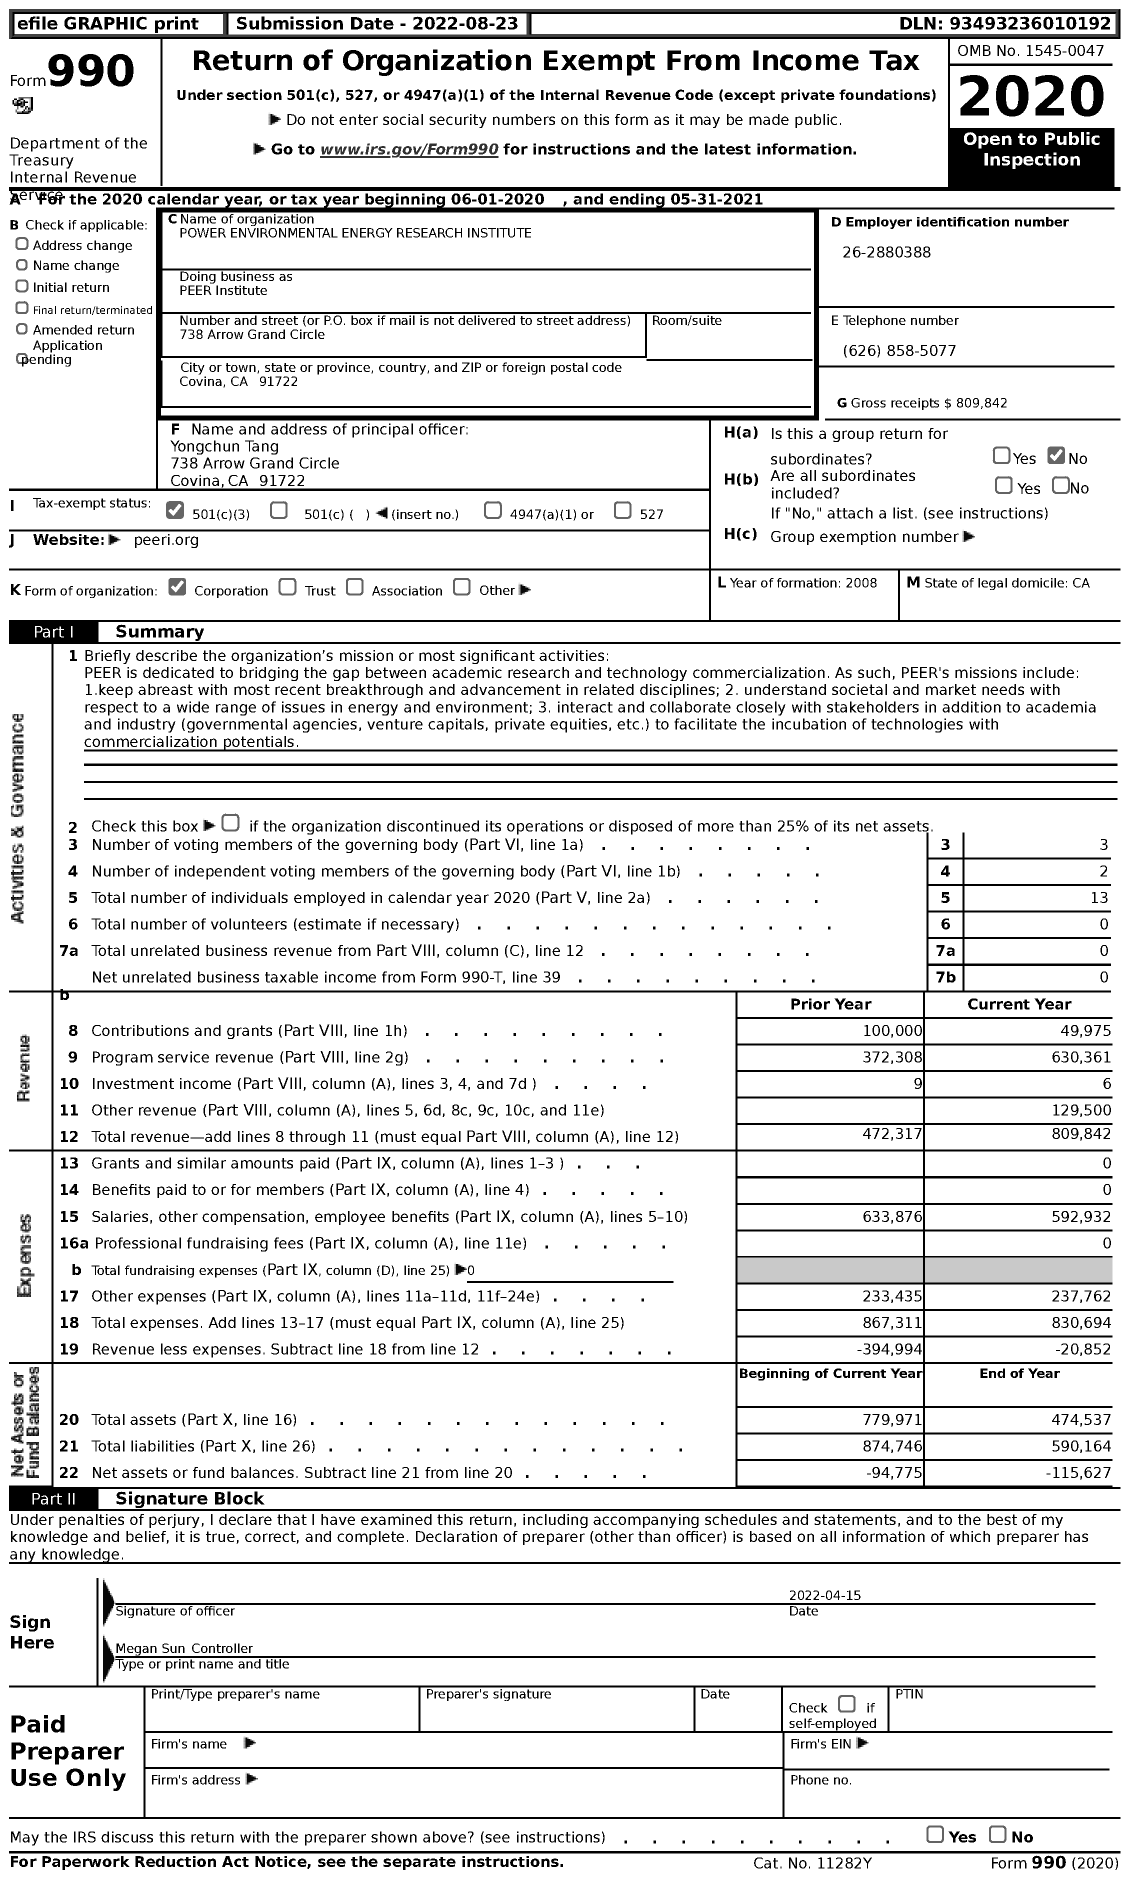 Image of first page of 2020 Form 990 for PEER Institute / Power Environmental Energy Research Institute (PEERI)